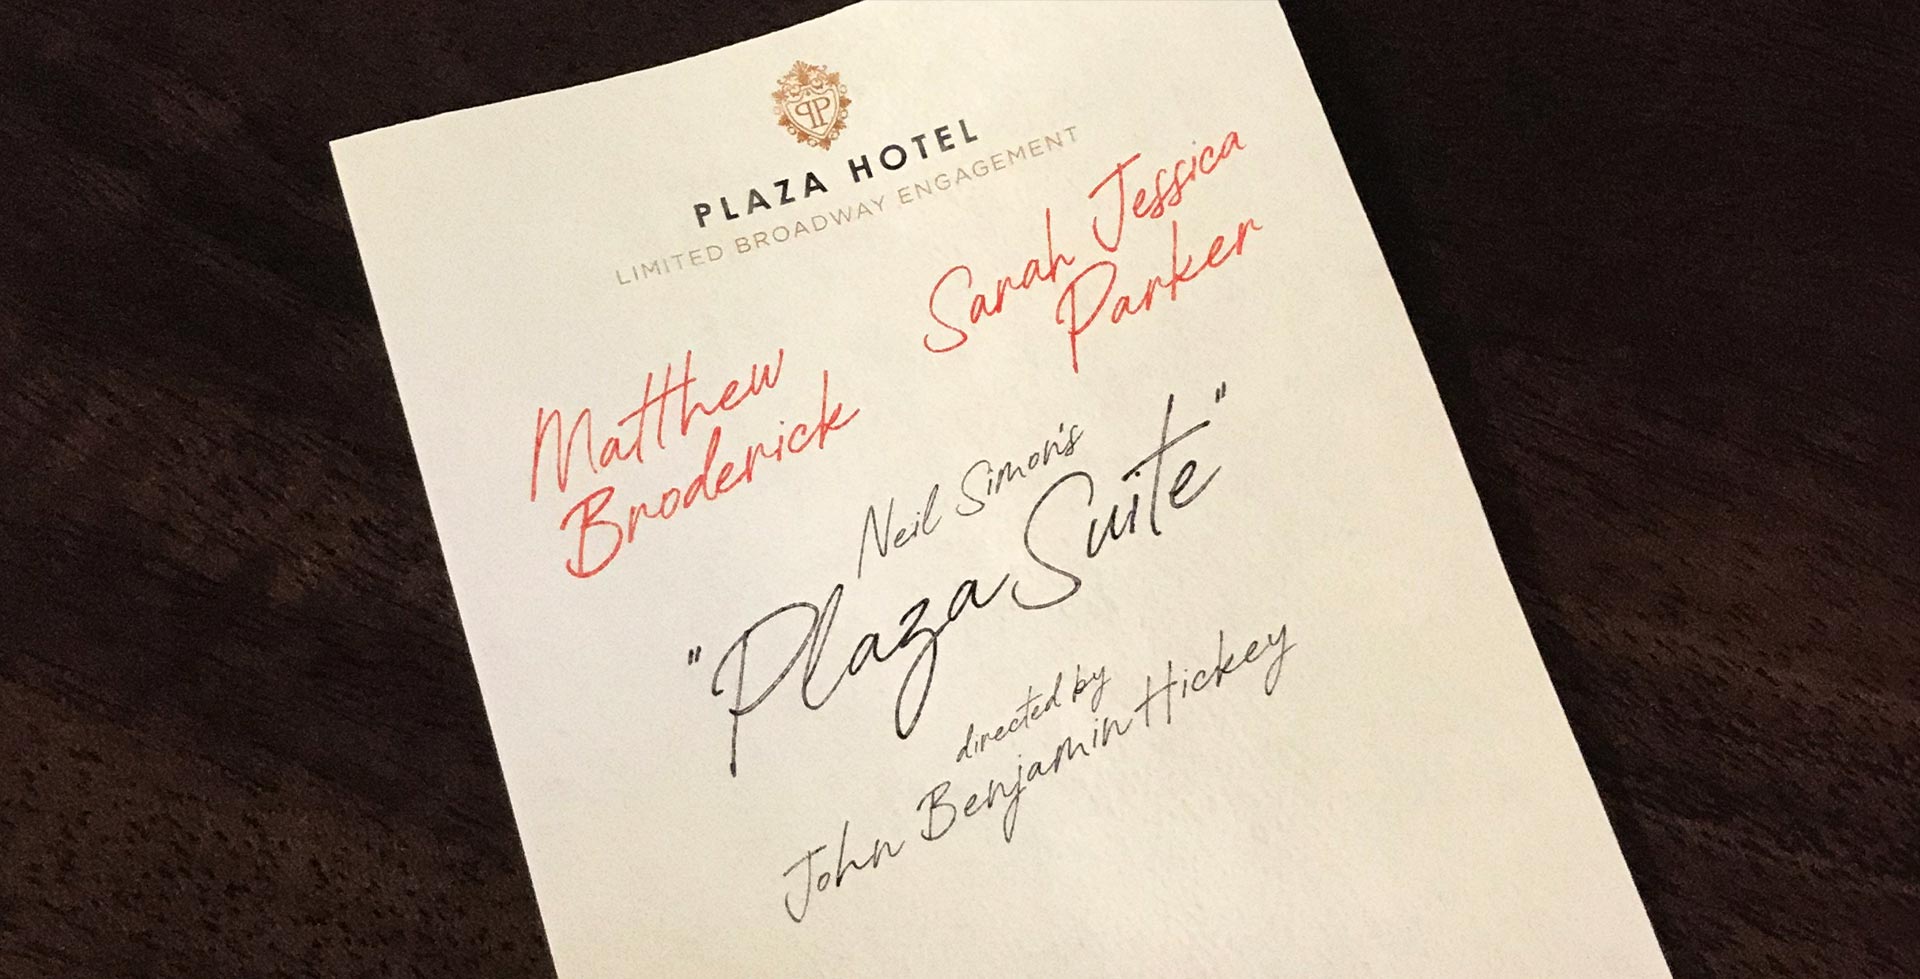 PLAZA SUITE revival coming Spring 2020